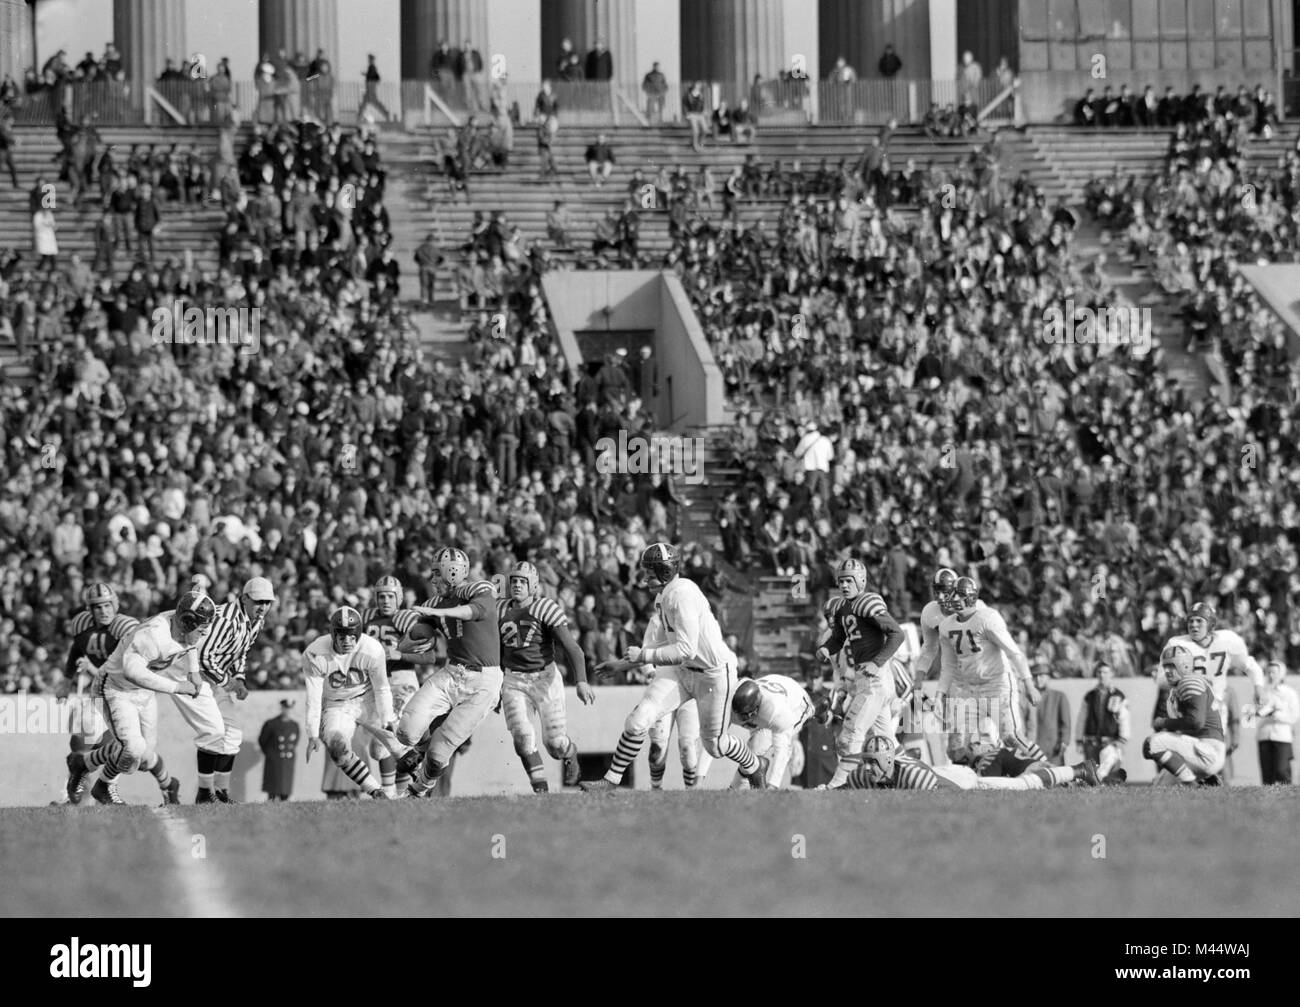 Championship high school football is played at Chicago's Soldier Field, ca. 1949. Stock Photo